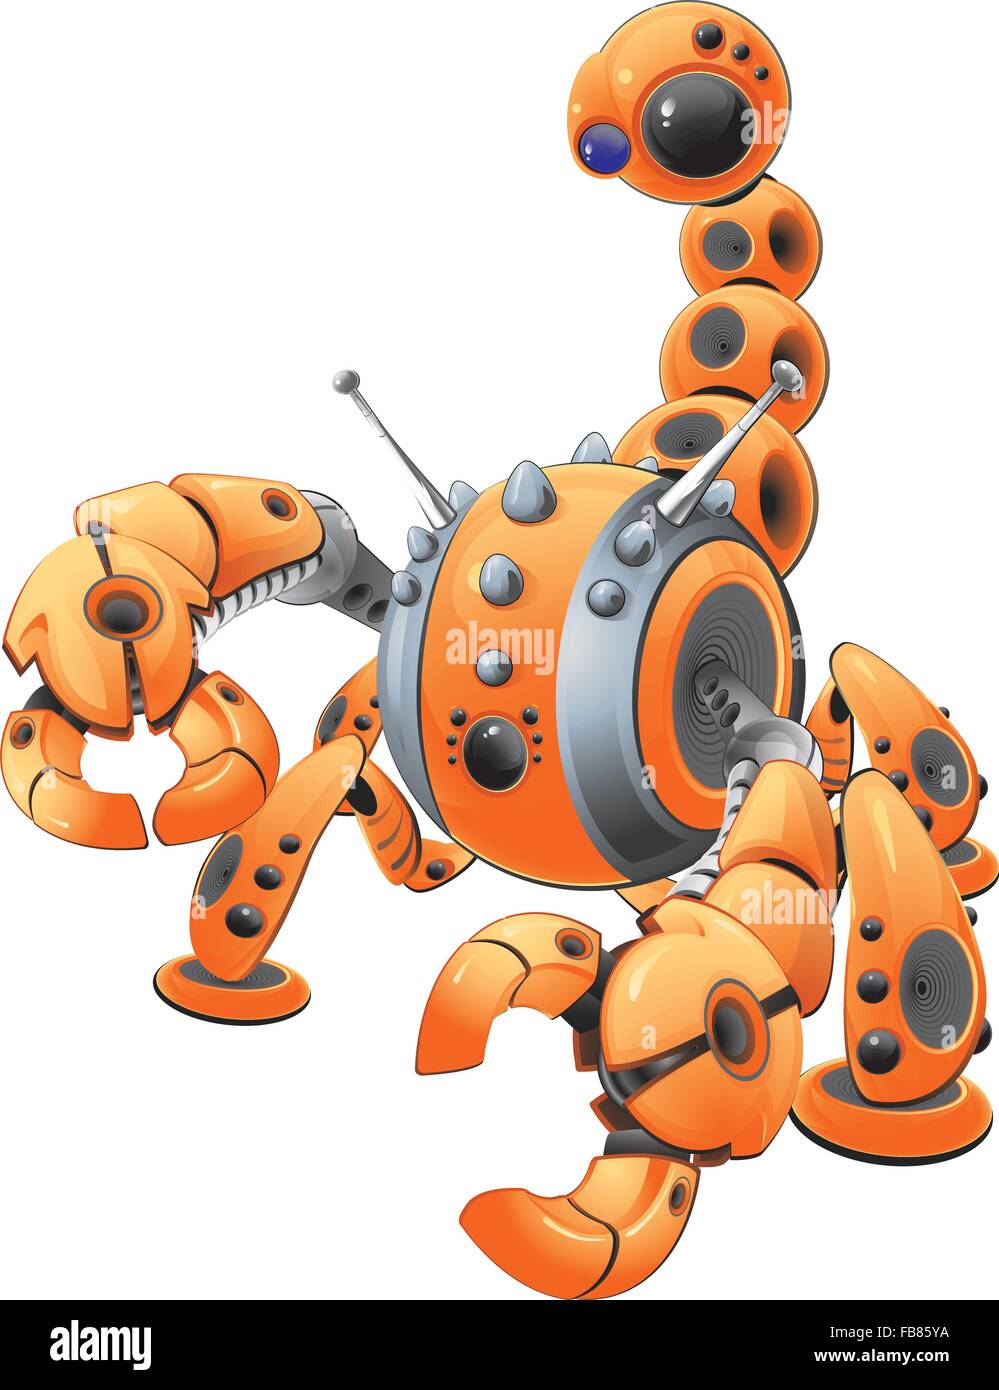 A vector illustration of a large orange scorpion robot in an attack pose. Made to represent spyware. Created as part of a "cyber. Stock Vector